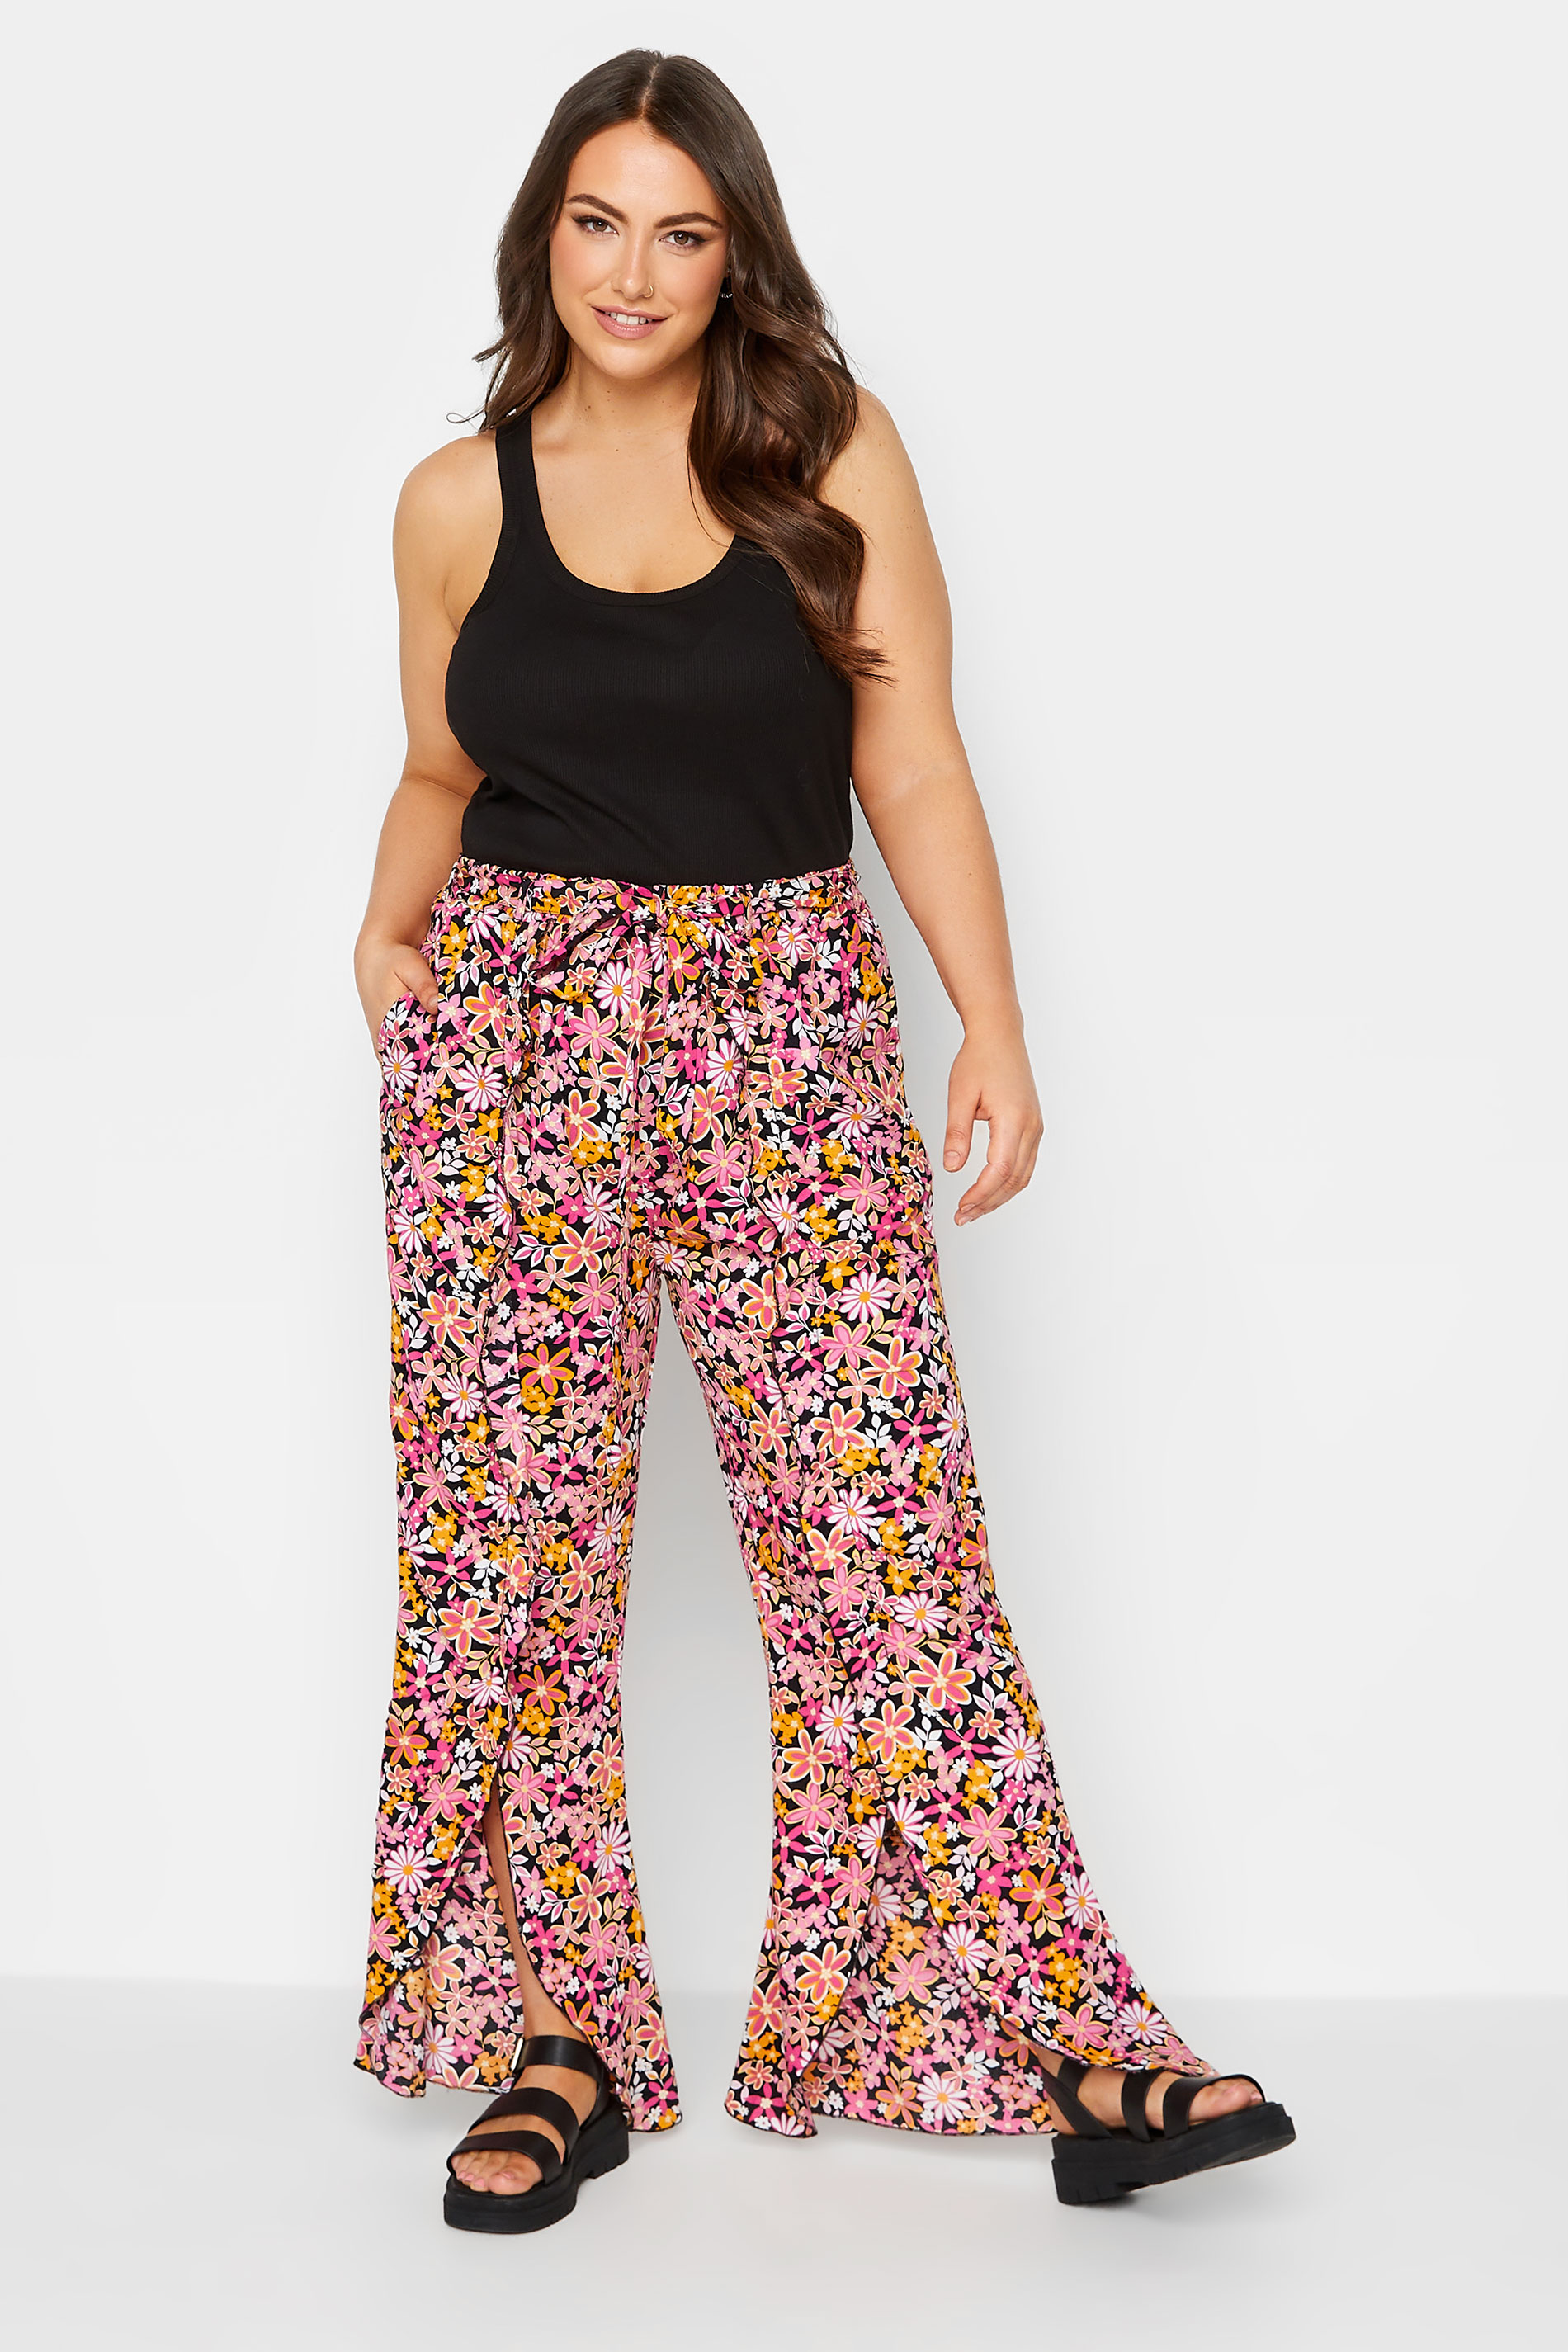 Rose pink and cream floral pants